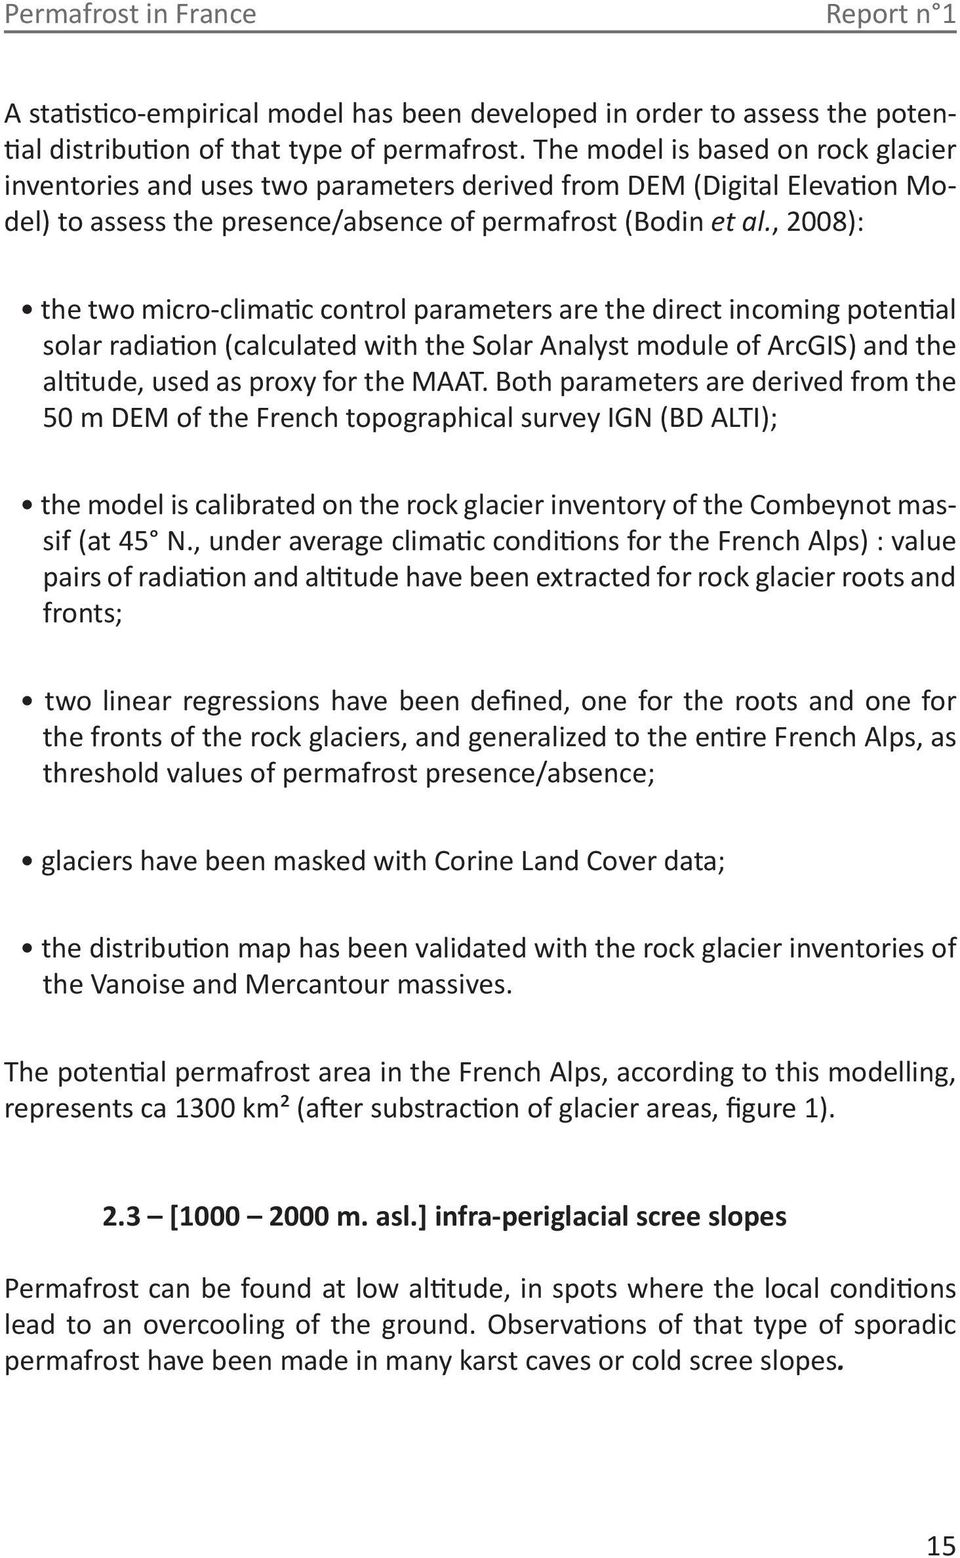 , 2008): the two micro-climatic control parameters are the direct incoming potential solar radiation (calculated with the Solar Analyst module of ArcGIS) and the altitude, used as proxy for the MAAT.